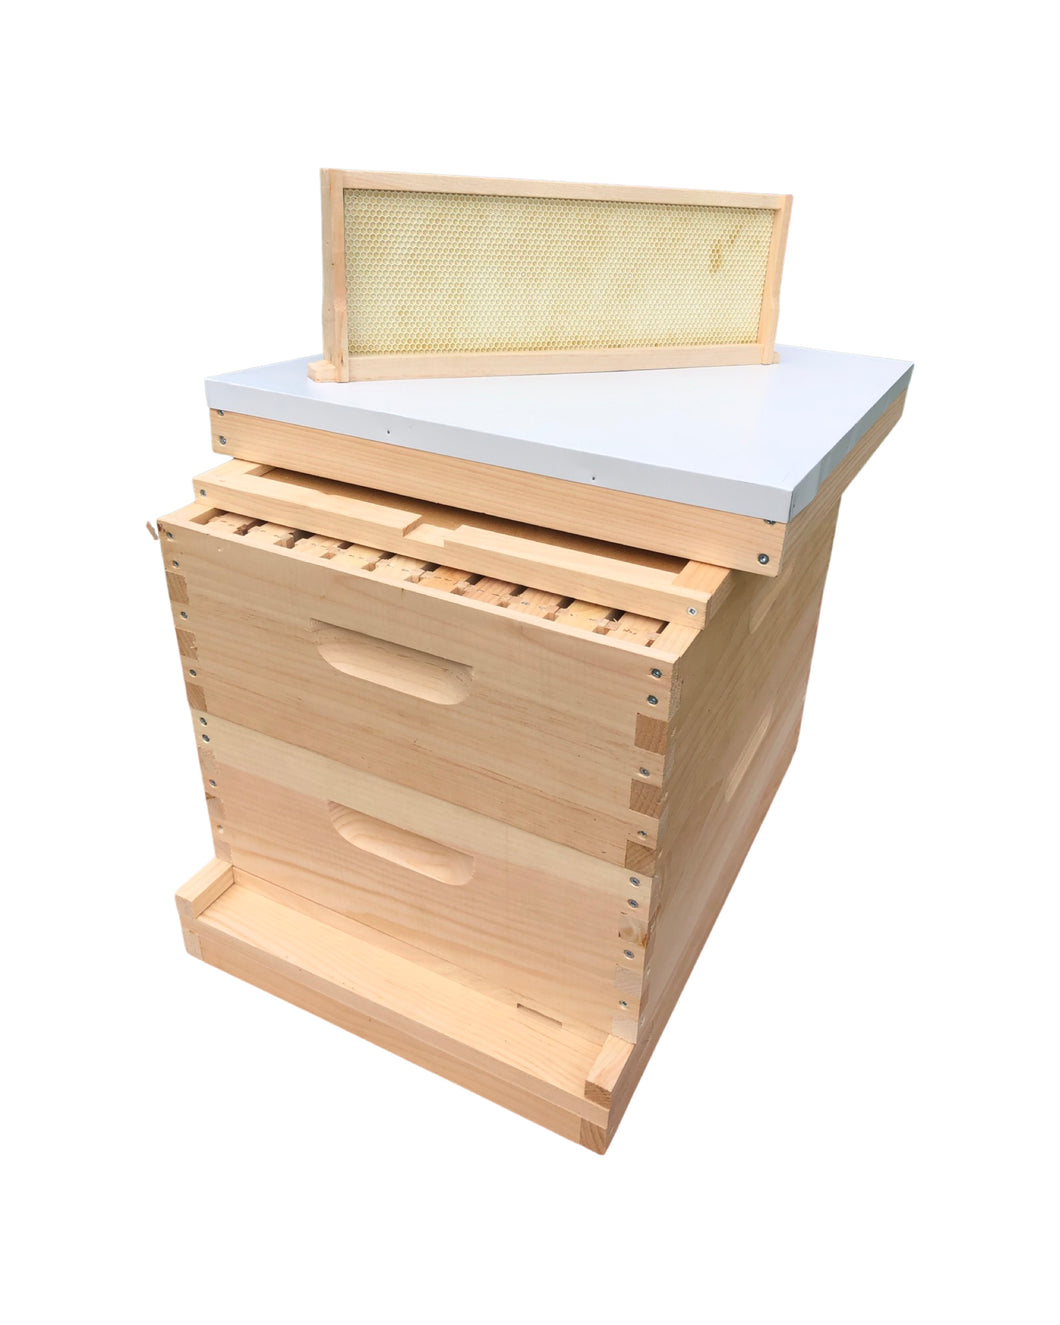 2 Medium 6 5/8 Complete Bee hive w/Frames & Foundations Assembled Langstroth